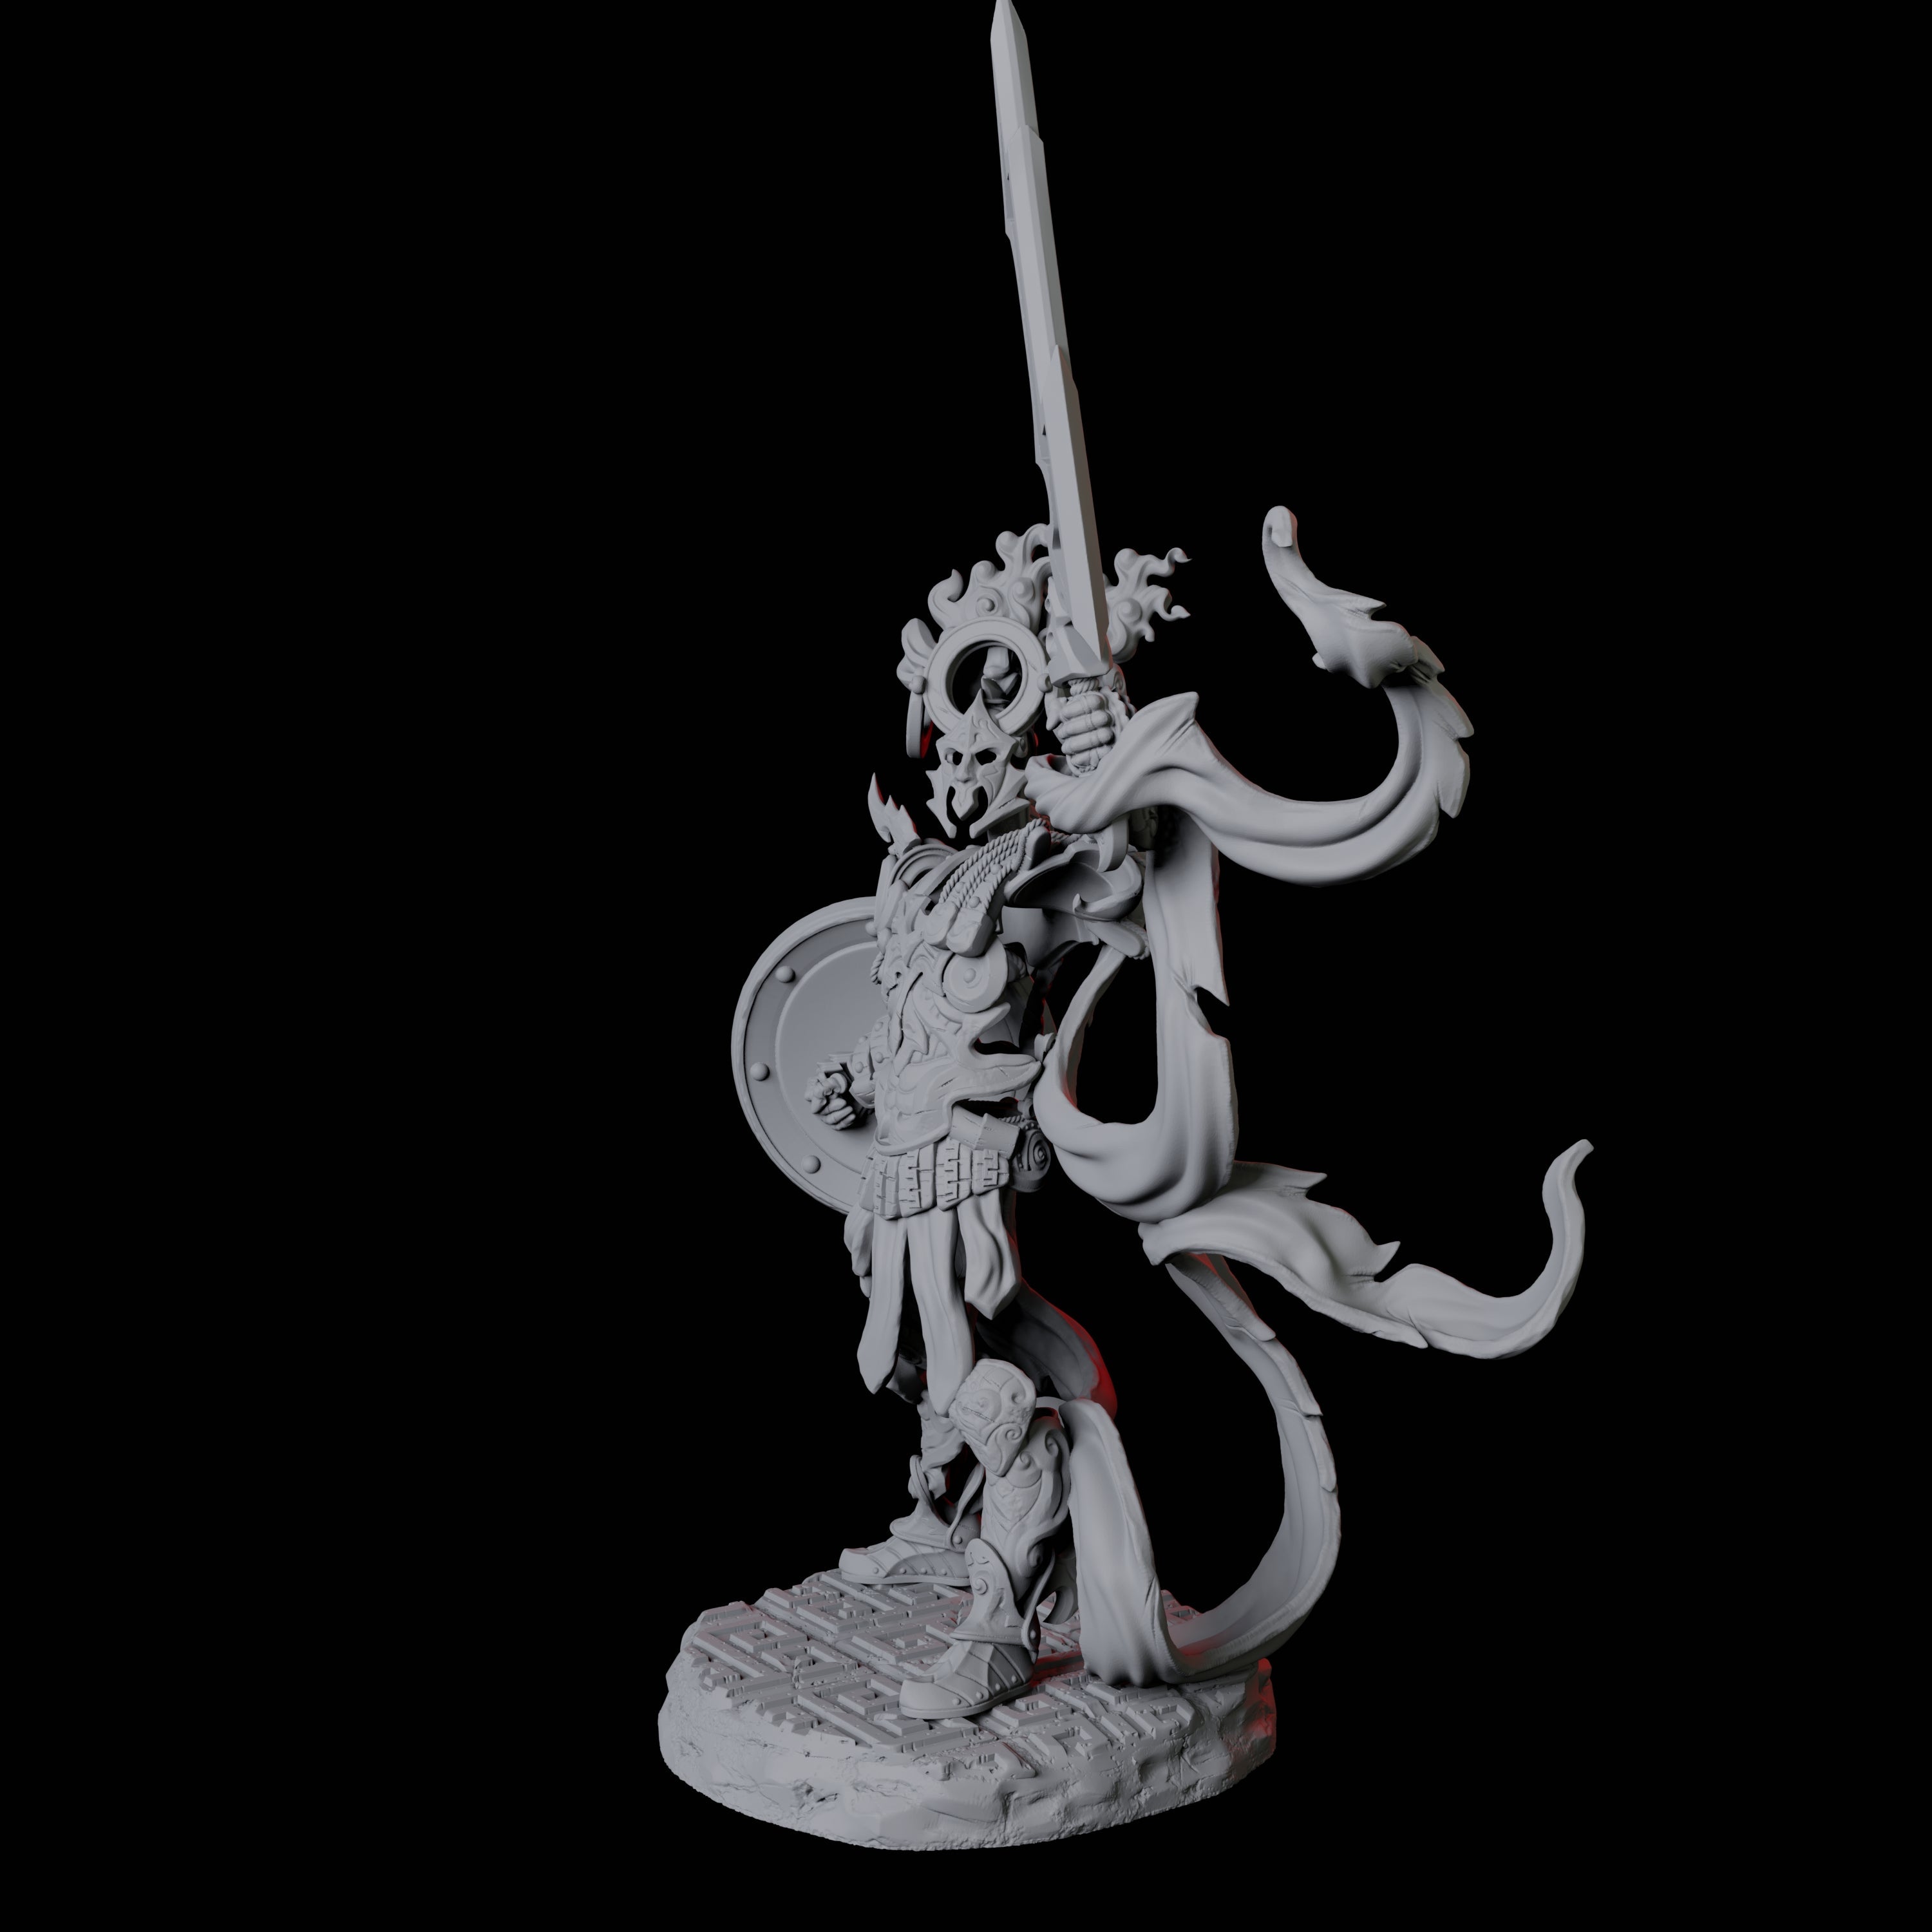 Shield Guardian B Miniature for Dungeons and Dragons, Pathfinder or other TTRPGs